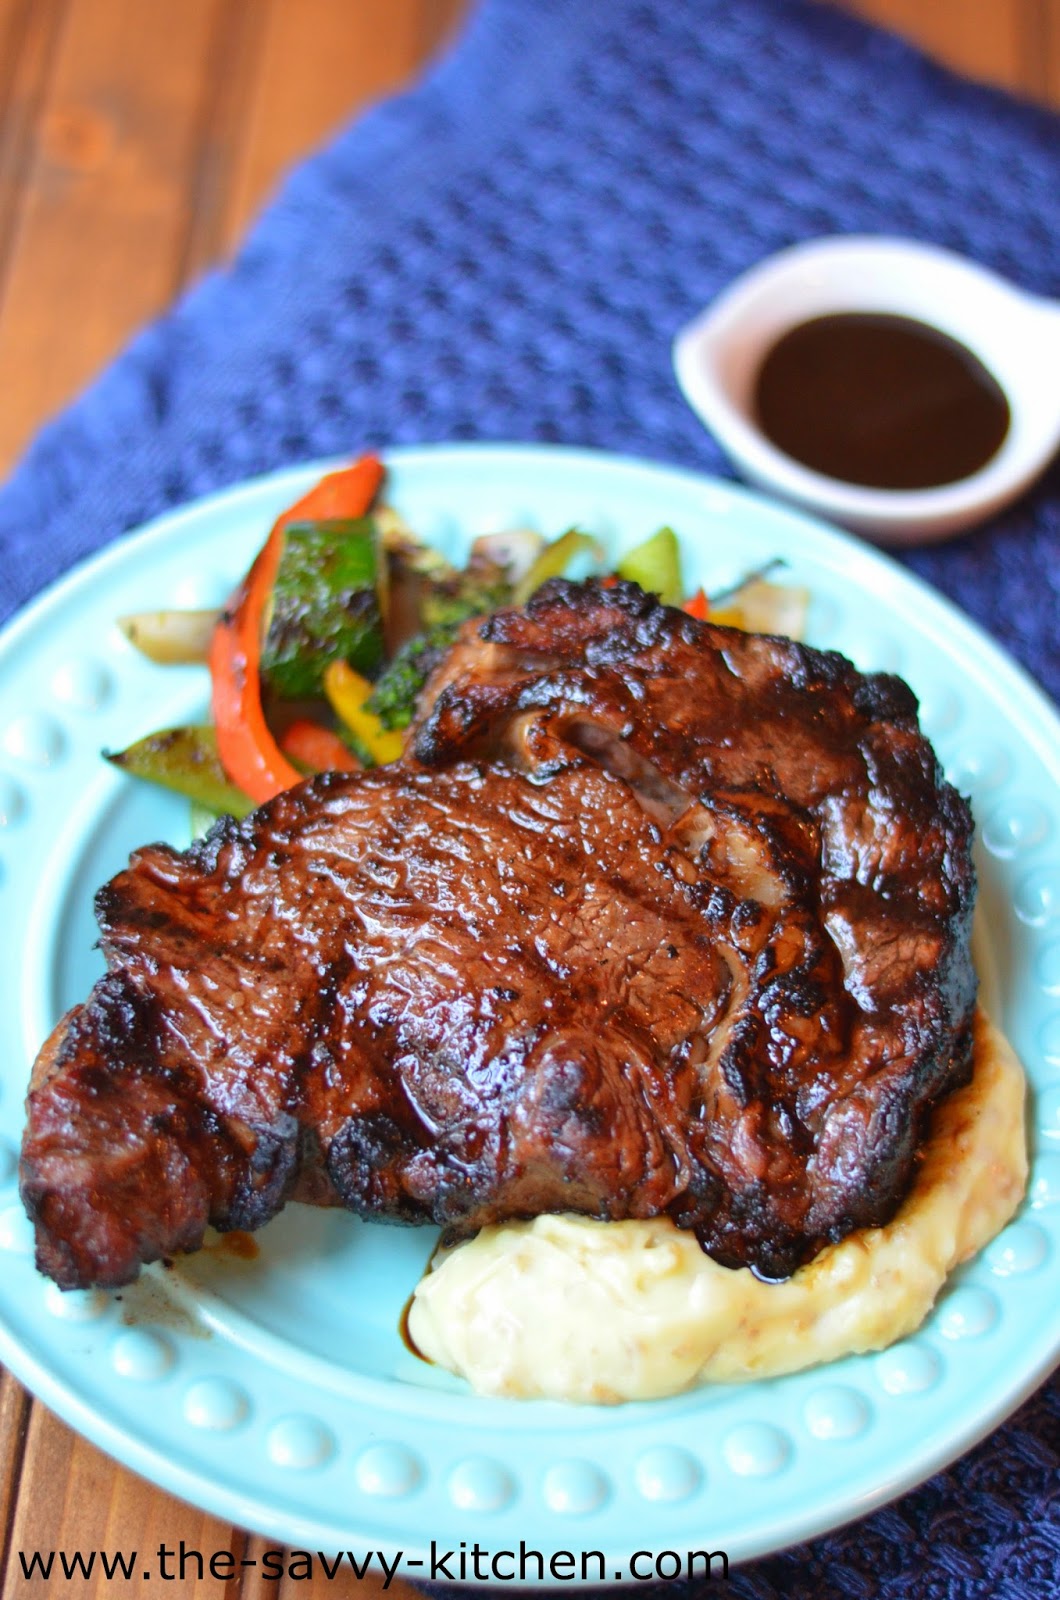 The Savvy Kitchen: Soy Sauce and Pineapple Marinated Ribeye